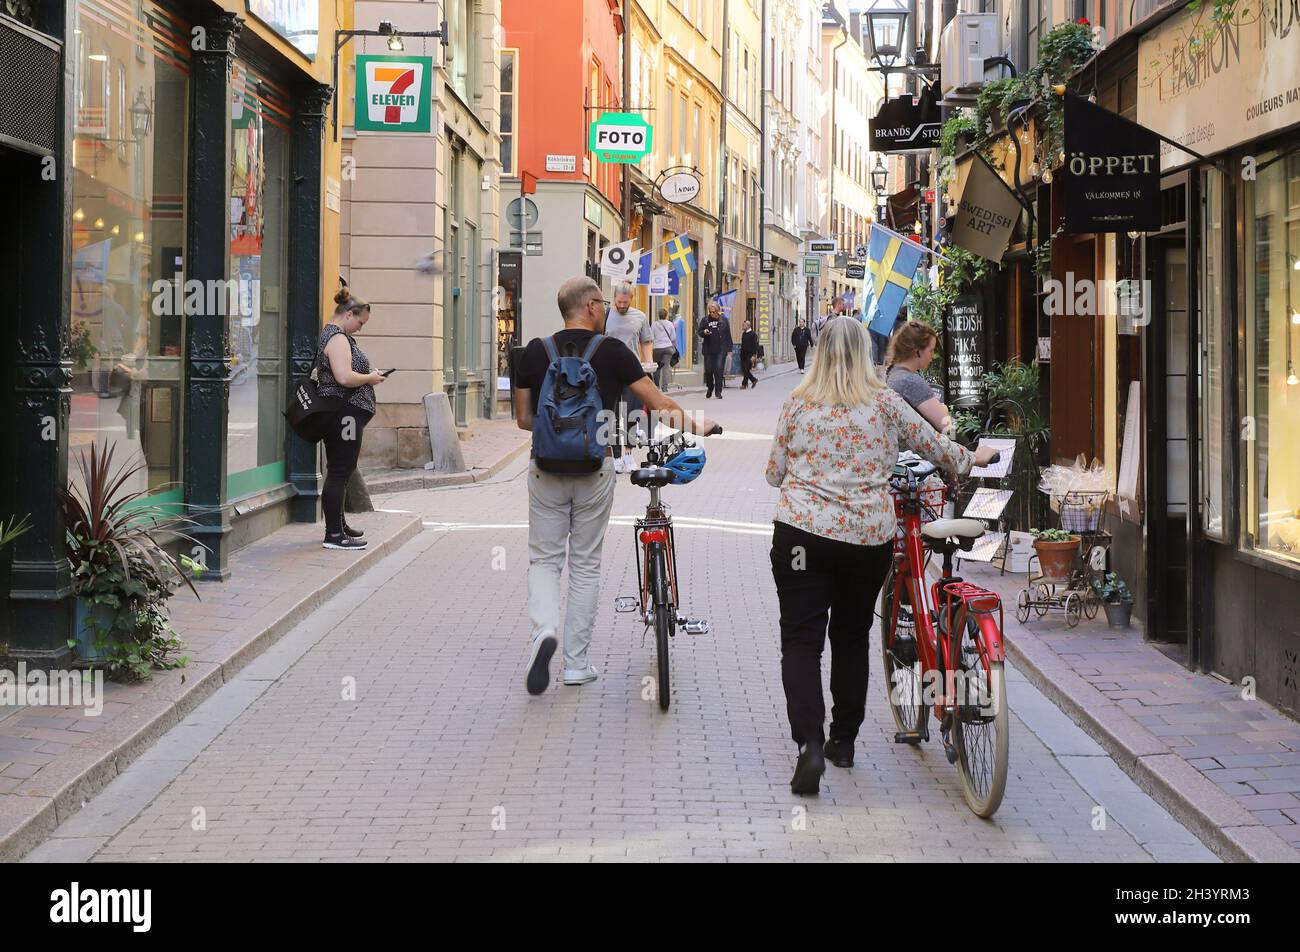 Stockholm, Sweden - August 31, 2021: Two people walking with bicycles at the Vasterlangatan street in the Old town district. Stock Photo